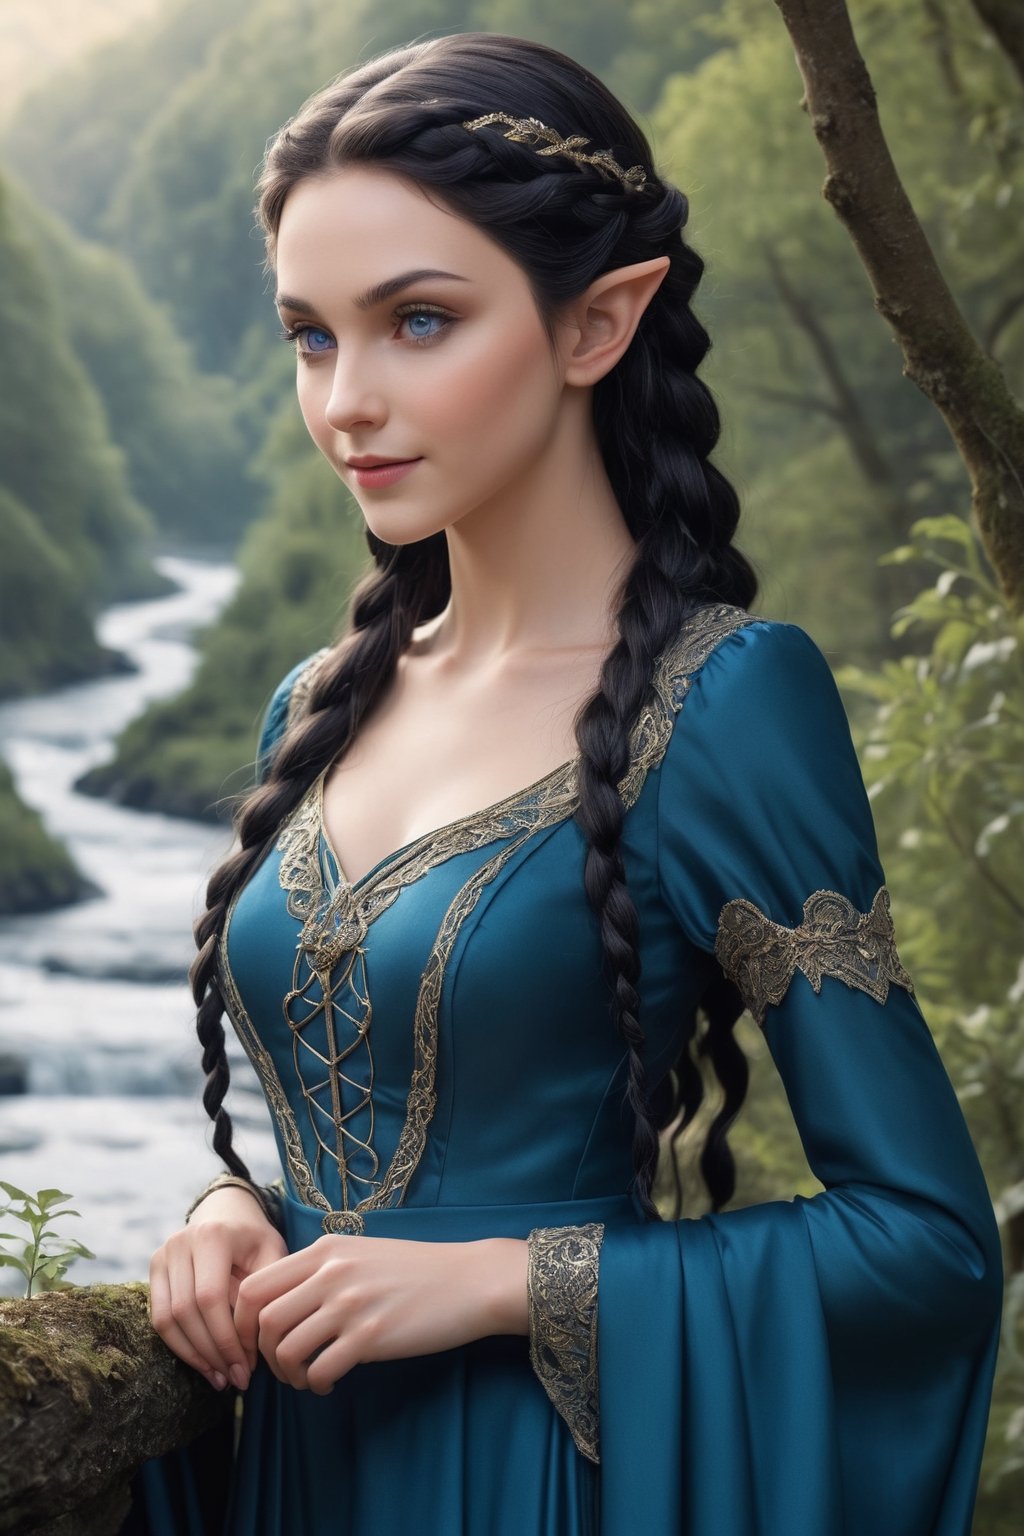 Extreme detailed,ultra Realistic,
extremely beautiful young ELF lady, dark hair, long elvish braid, side braid,Beautiful crystal blue eyes, dark blue silk dress, intricate clothing,, soft smile, bending posture, looking into the distance, 
sylvan woodland, overlooking valley, river,  seen from front, ,ol1v1adunne,DonM3lv3sXL,niji6